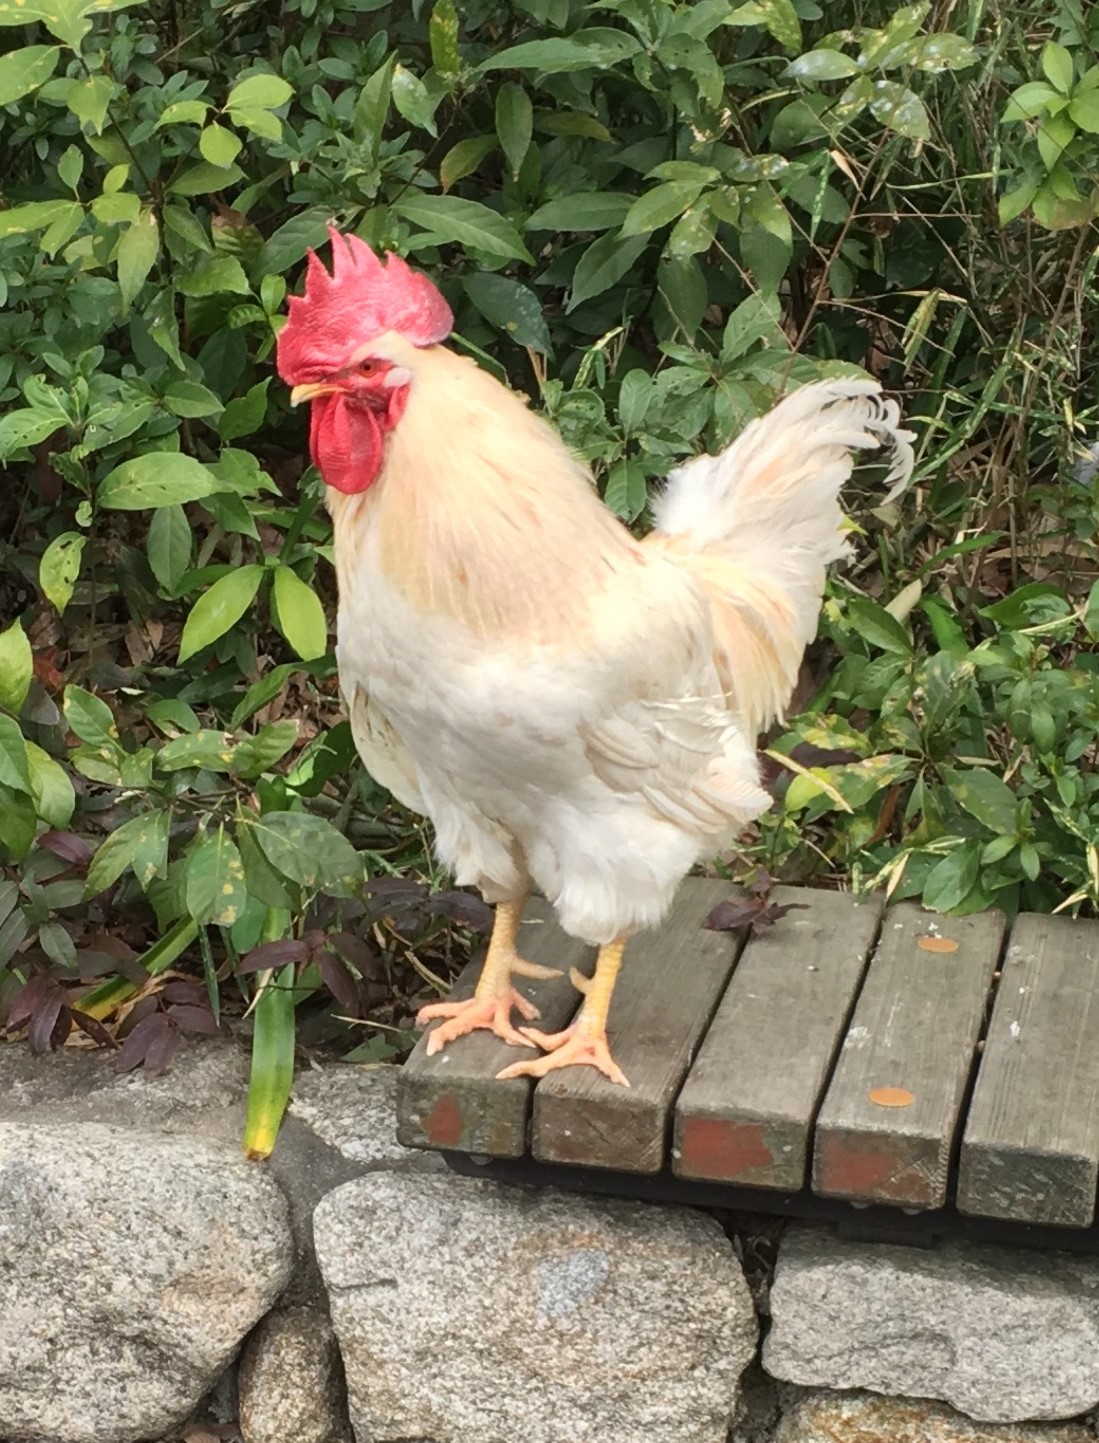 white farm chicken on a wooden bench in front of a bush